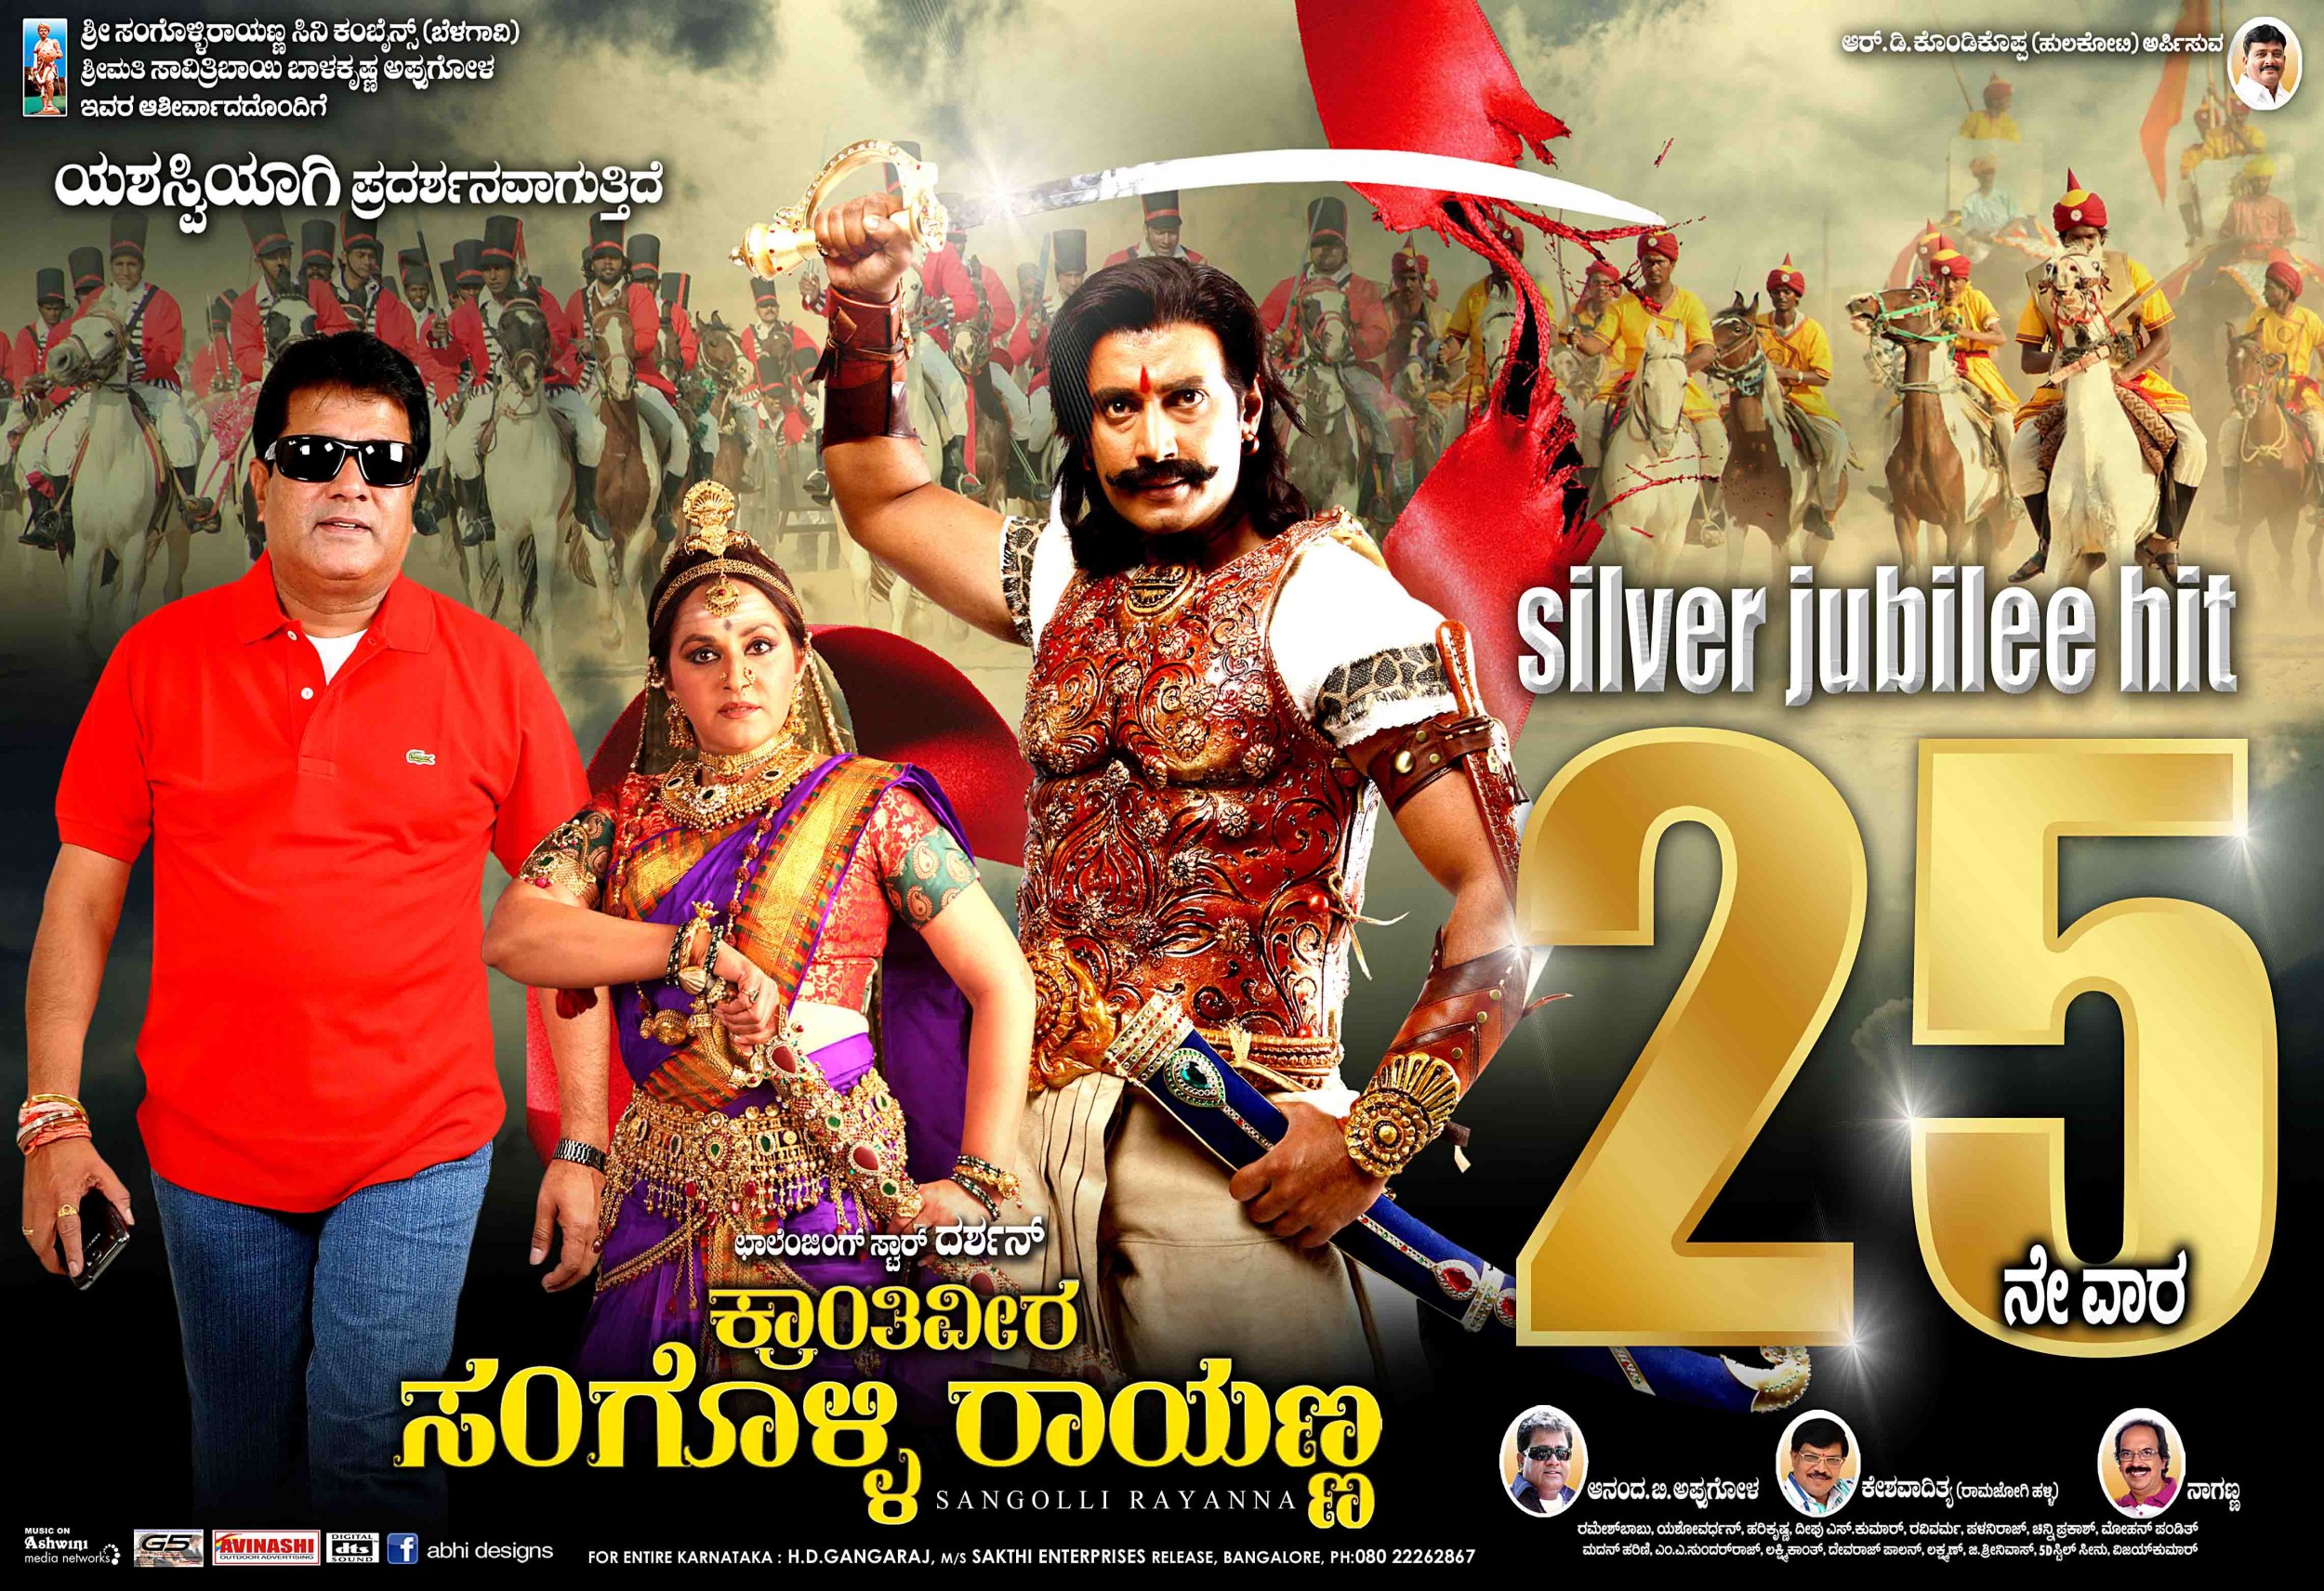 Mega Sized Movie Poster Image for Sangolli Rayanna (#71 of 79)